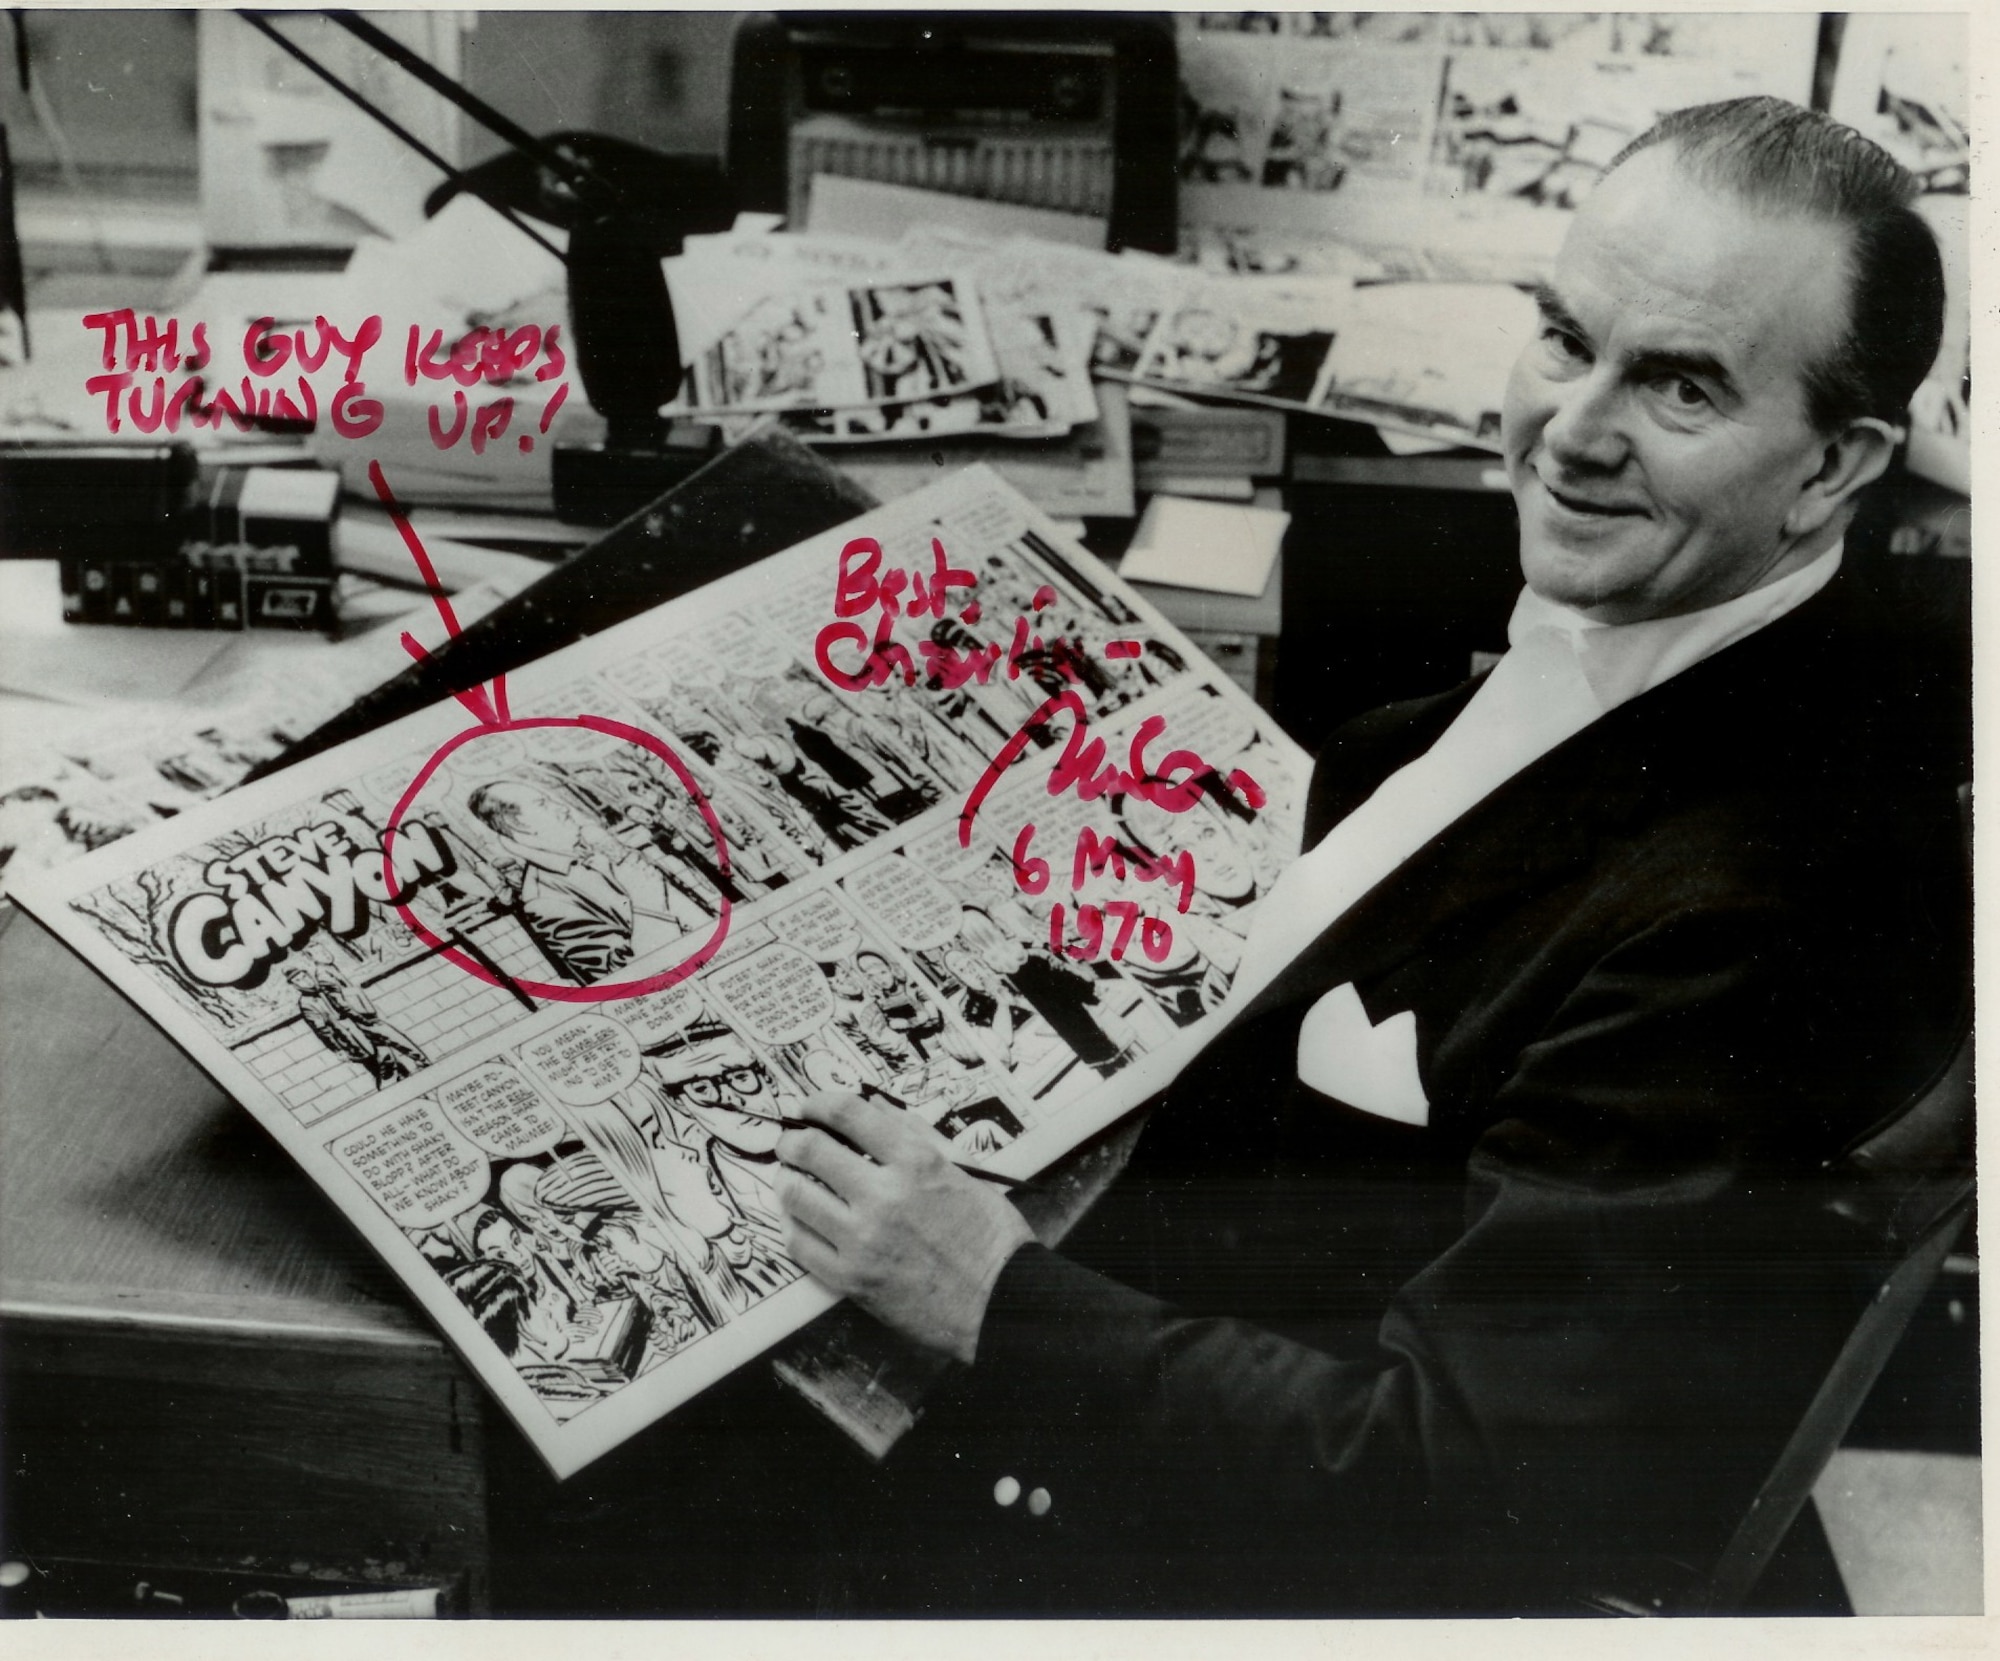 American cartoonist Milton Caniff poses with his “Steve Canyon” comic strip featuring “Charlie Vanilla,” a character inspired by his friend Retired Lieutenant Colonel Charles Russhon, one of the original Air Commandos and military advisor to the James Bond films in the ‘60s and ‘70s. The signed photograph features a circled “Charlie Vanilla,” aka Russhon, and says “this guy keeps turning up!” (Photo courtesy of Christian Russhon)